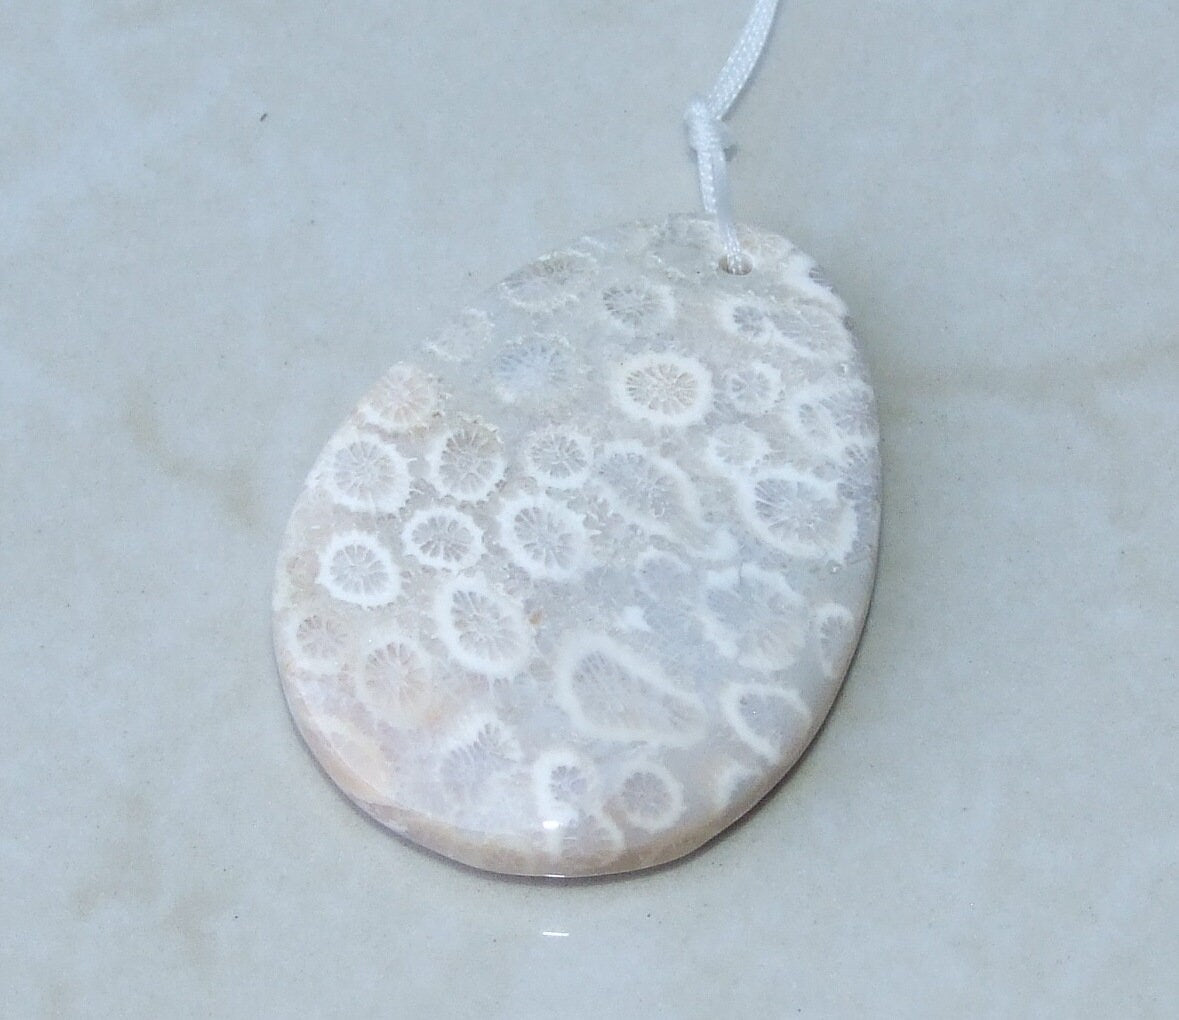 Fossil Coral Agate Pendant, Natural Stone Pendant, Druzy Pendant, Gemstone Pendant, Jewelry Stone, Necklace Pendant, 35mm x 48mm - 9493